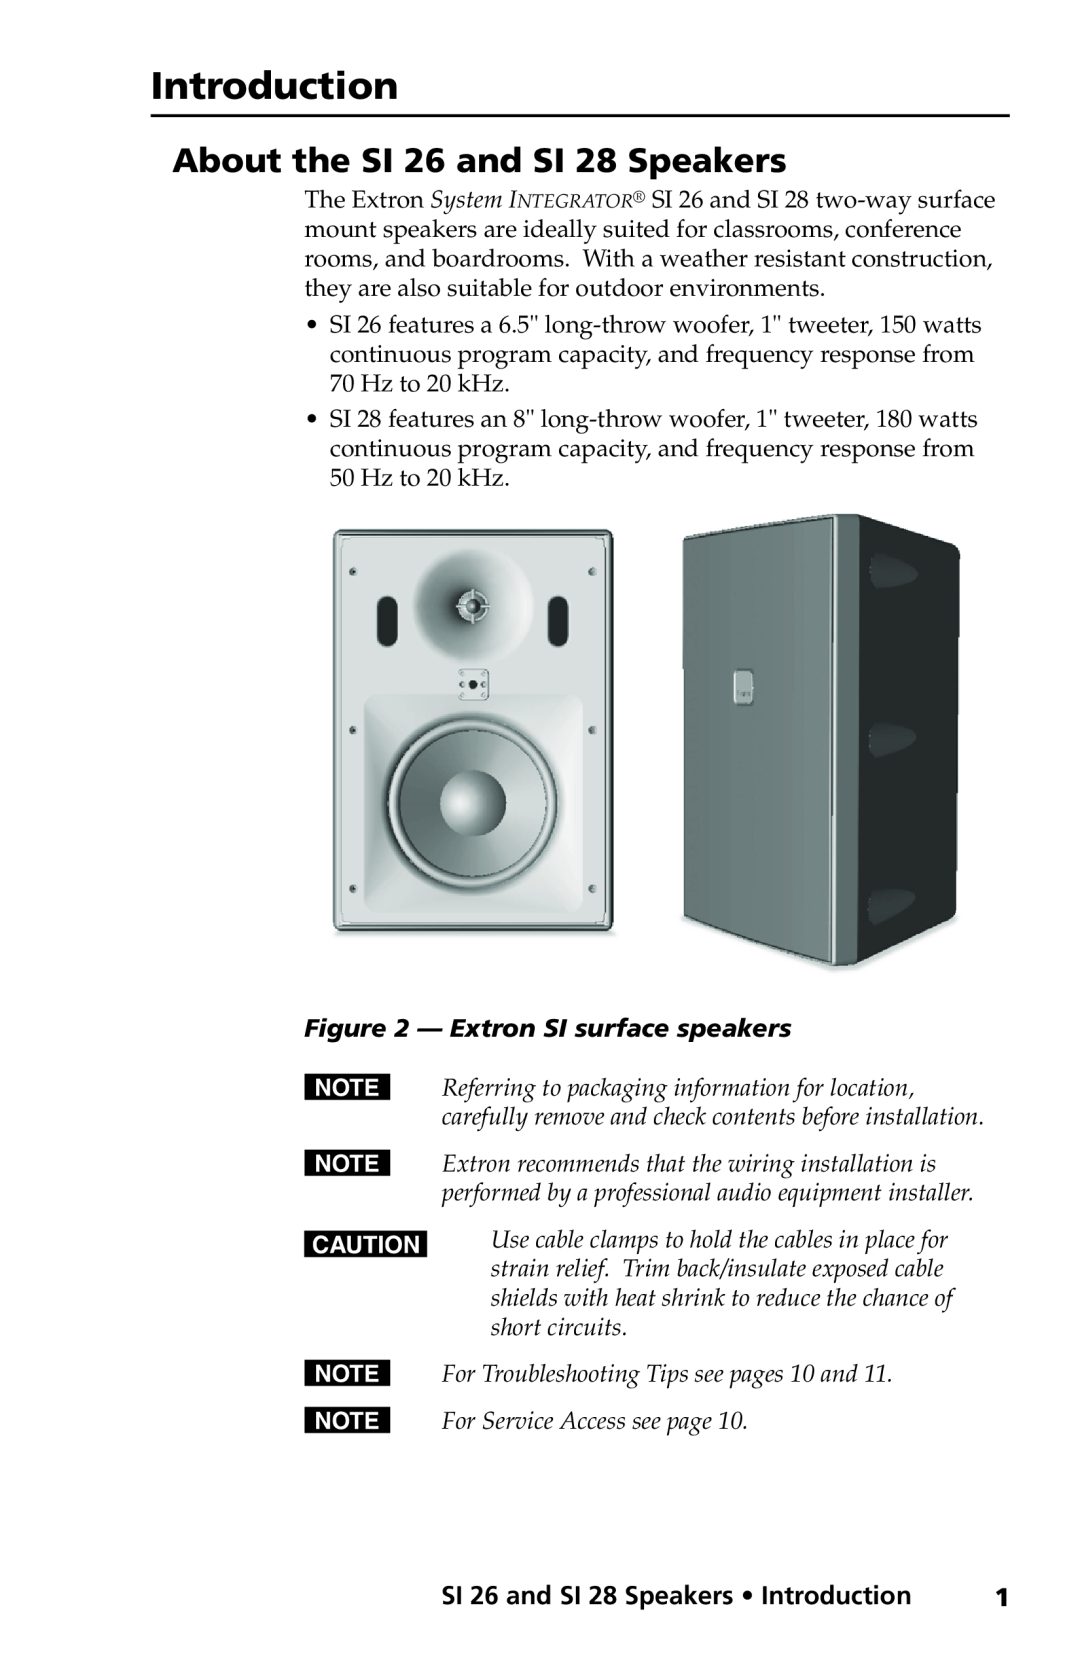 Extron electronic manual About the SI 26 and SI 28 Speakers, SI 26 and SI 28 Speakers Introduction 